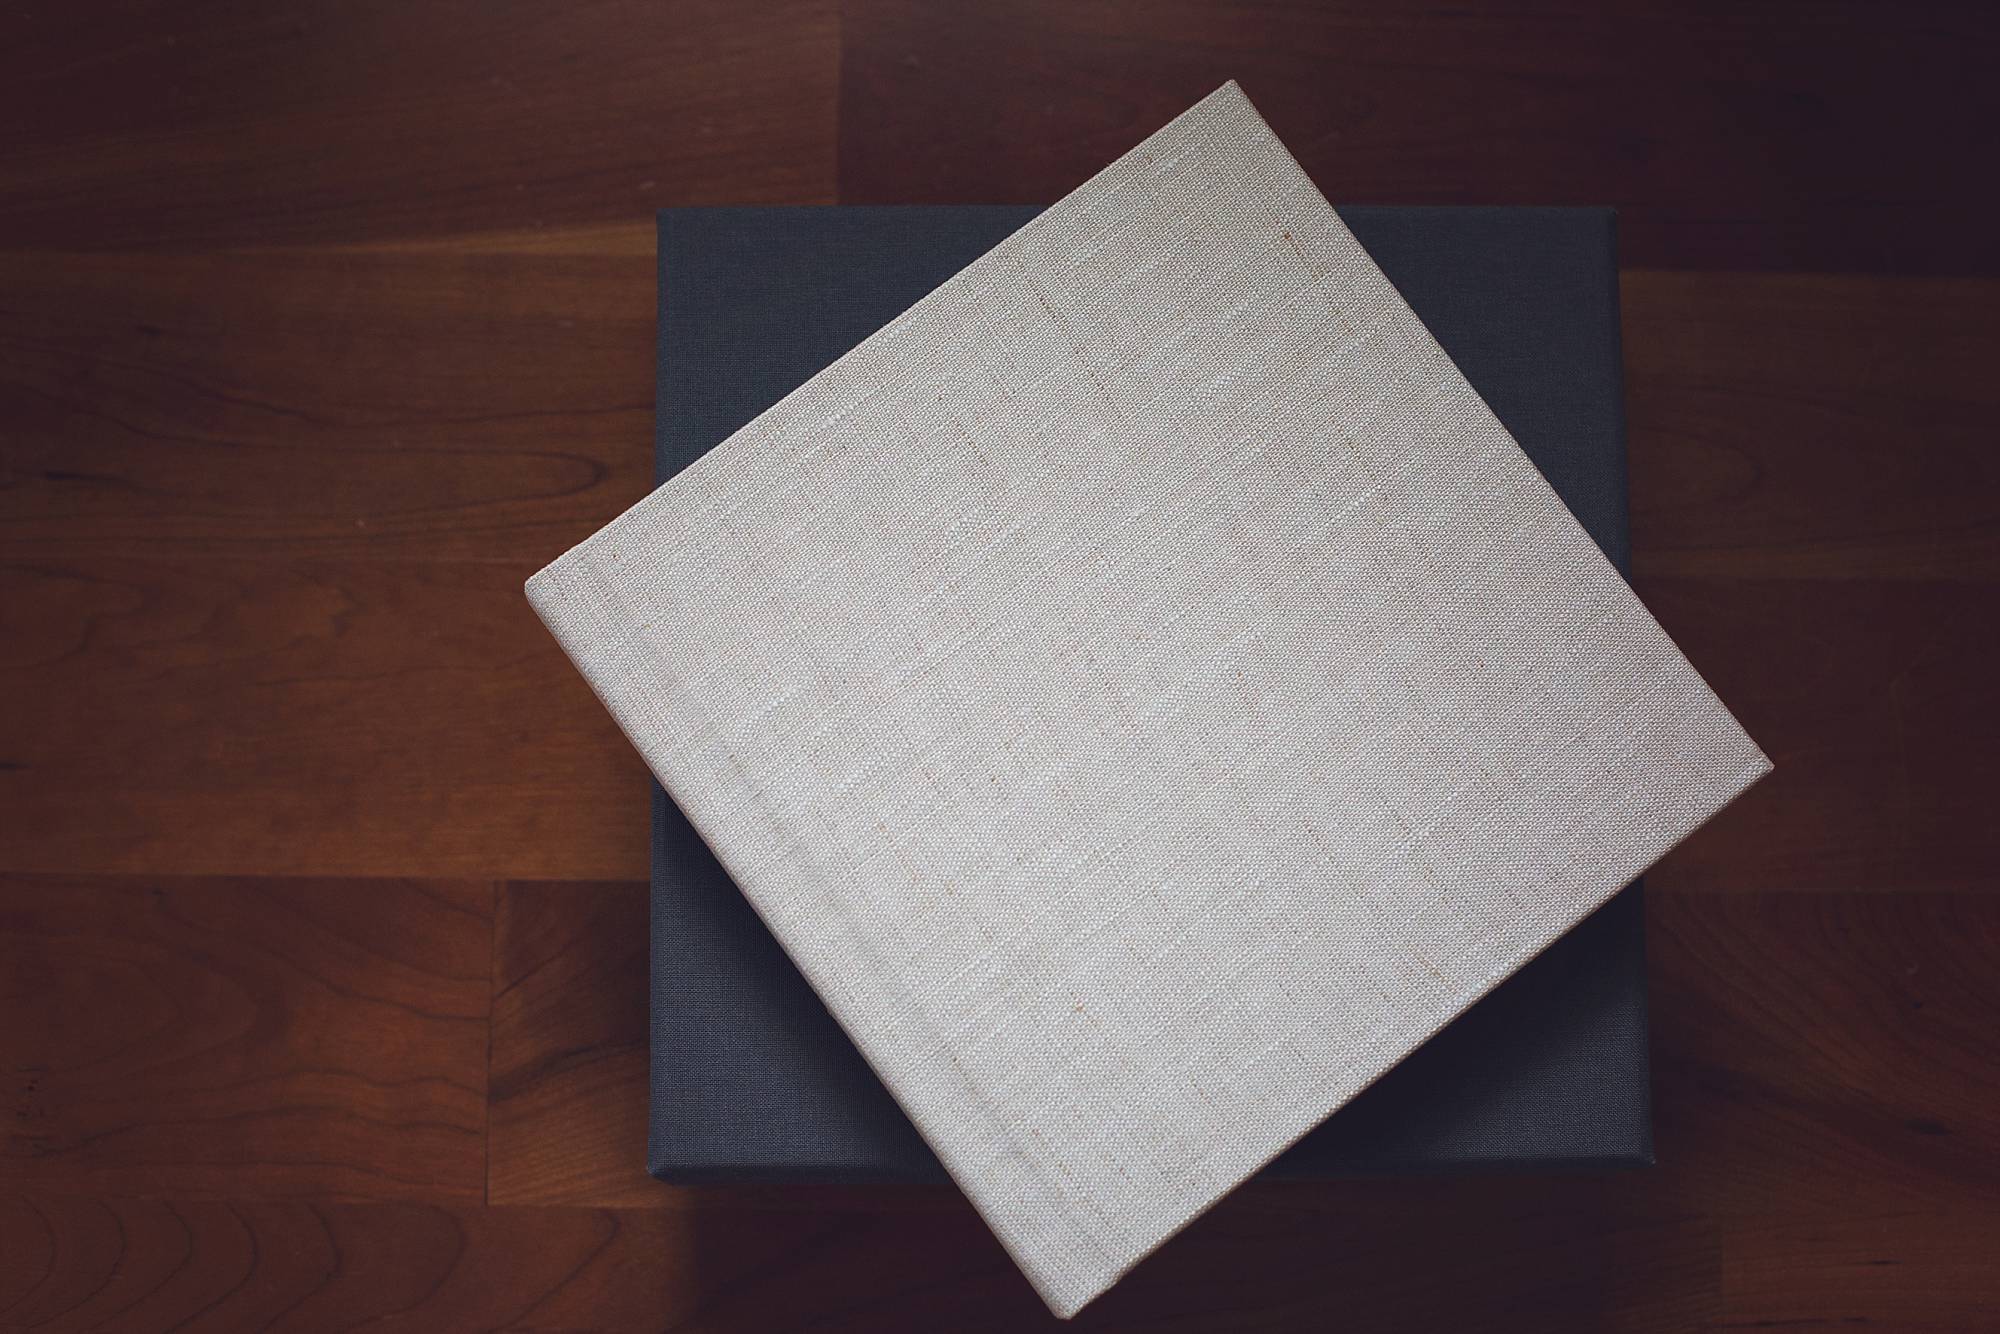 image of a square linen covered photo album. the cover is beige and the album is set on a dark wood floor